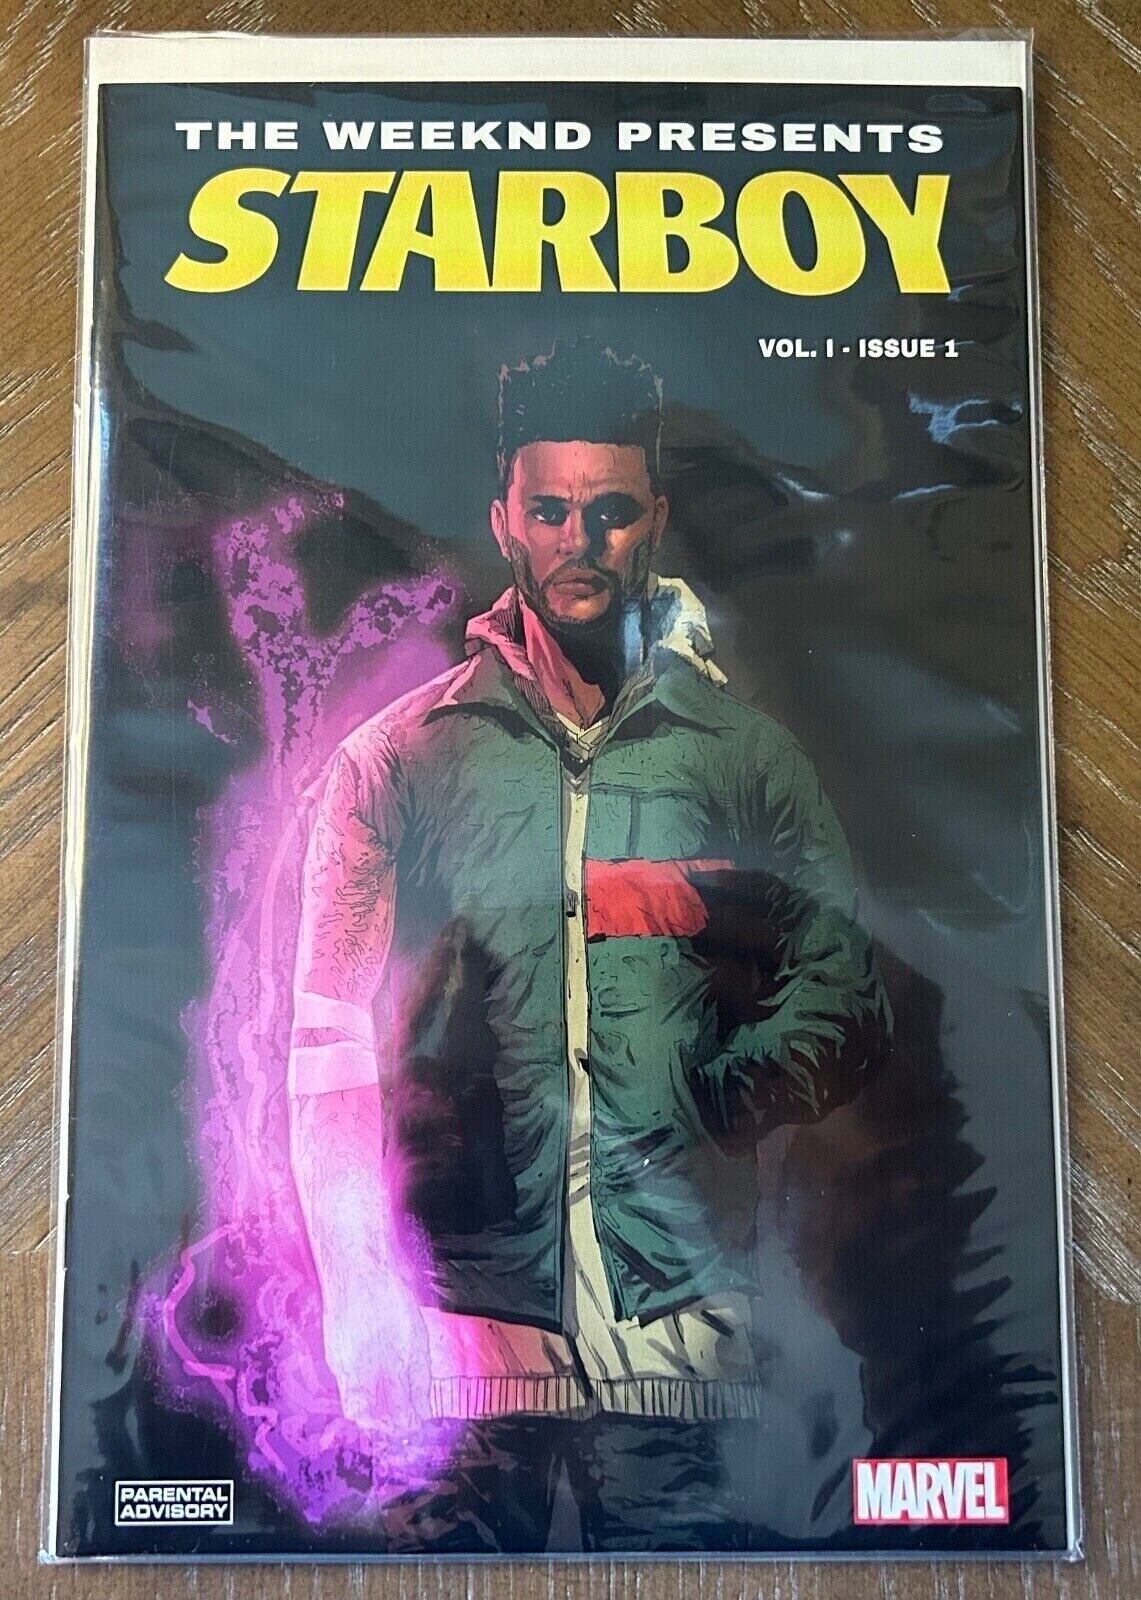 THE WEEKND PRESENTS STARBOY #1 (MARVEL 2018) LIMTED BLACK COVER VARIANT | RARE